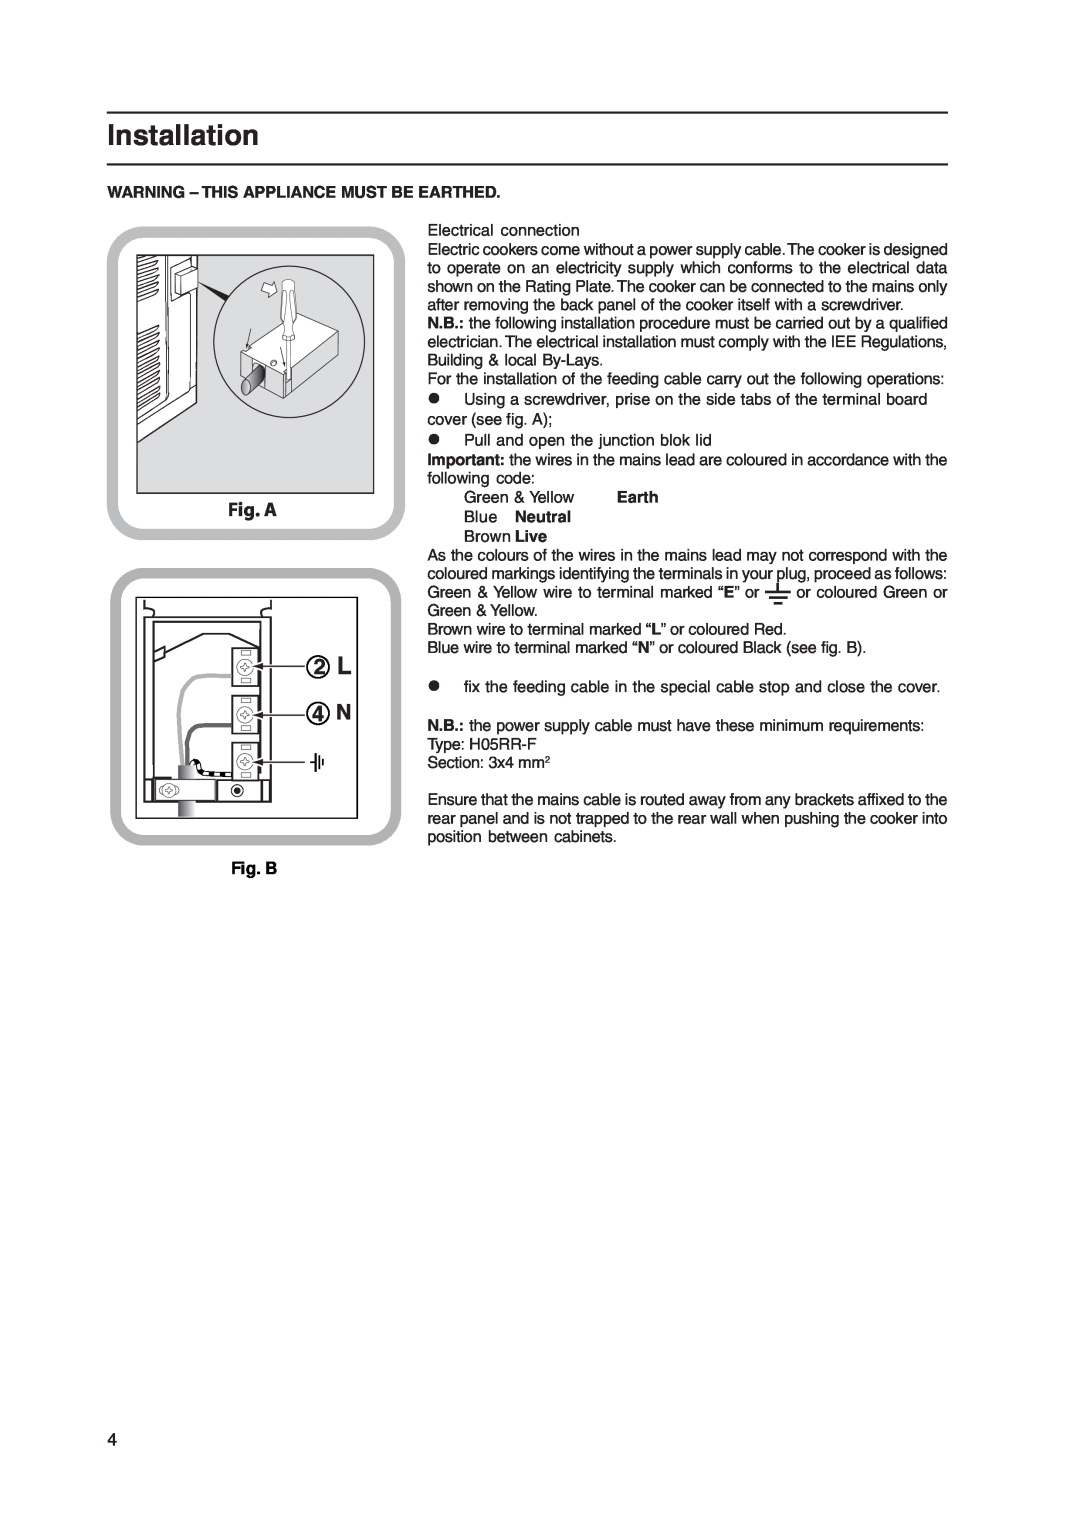 Indesit KD3E1/IR, KD3E1/G, KD3E11/G Installation, Fig. A, Fig. B, Warning – This Appliance Must Be Earthed, Blue Neutral 